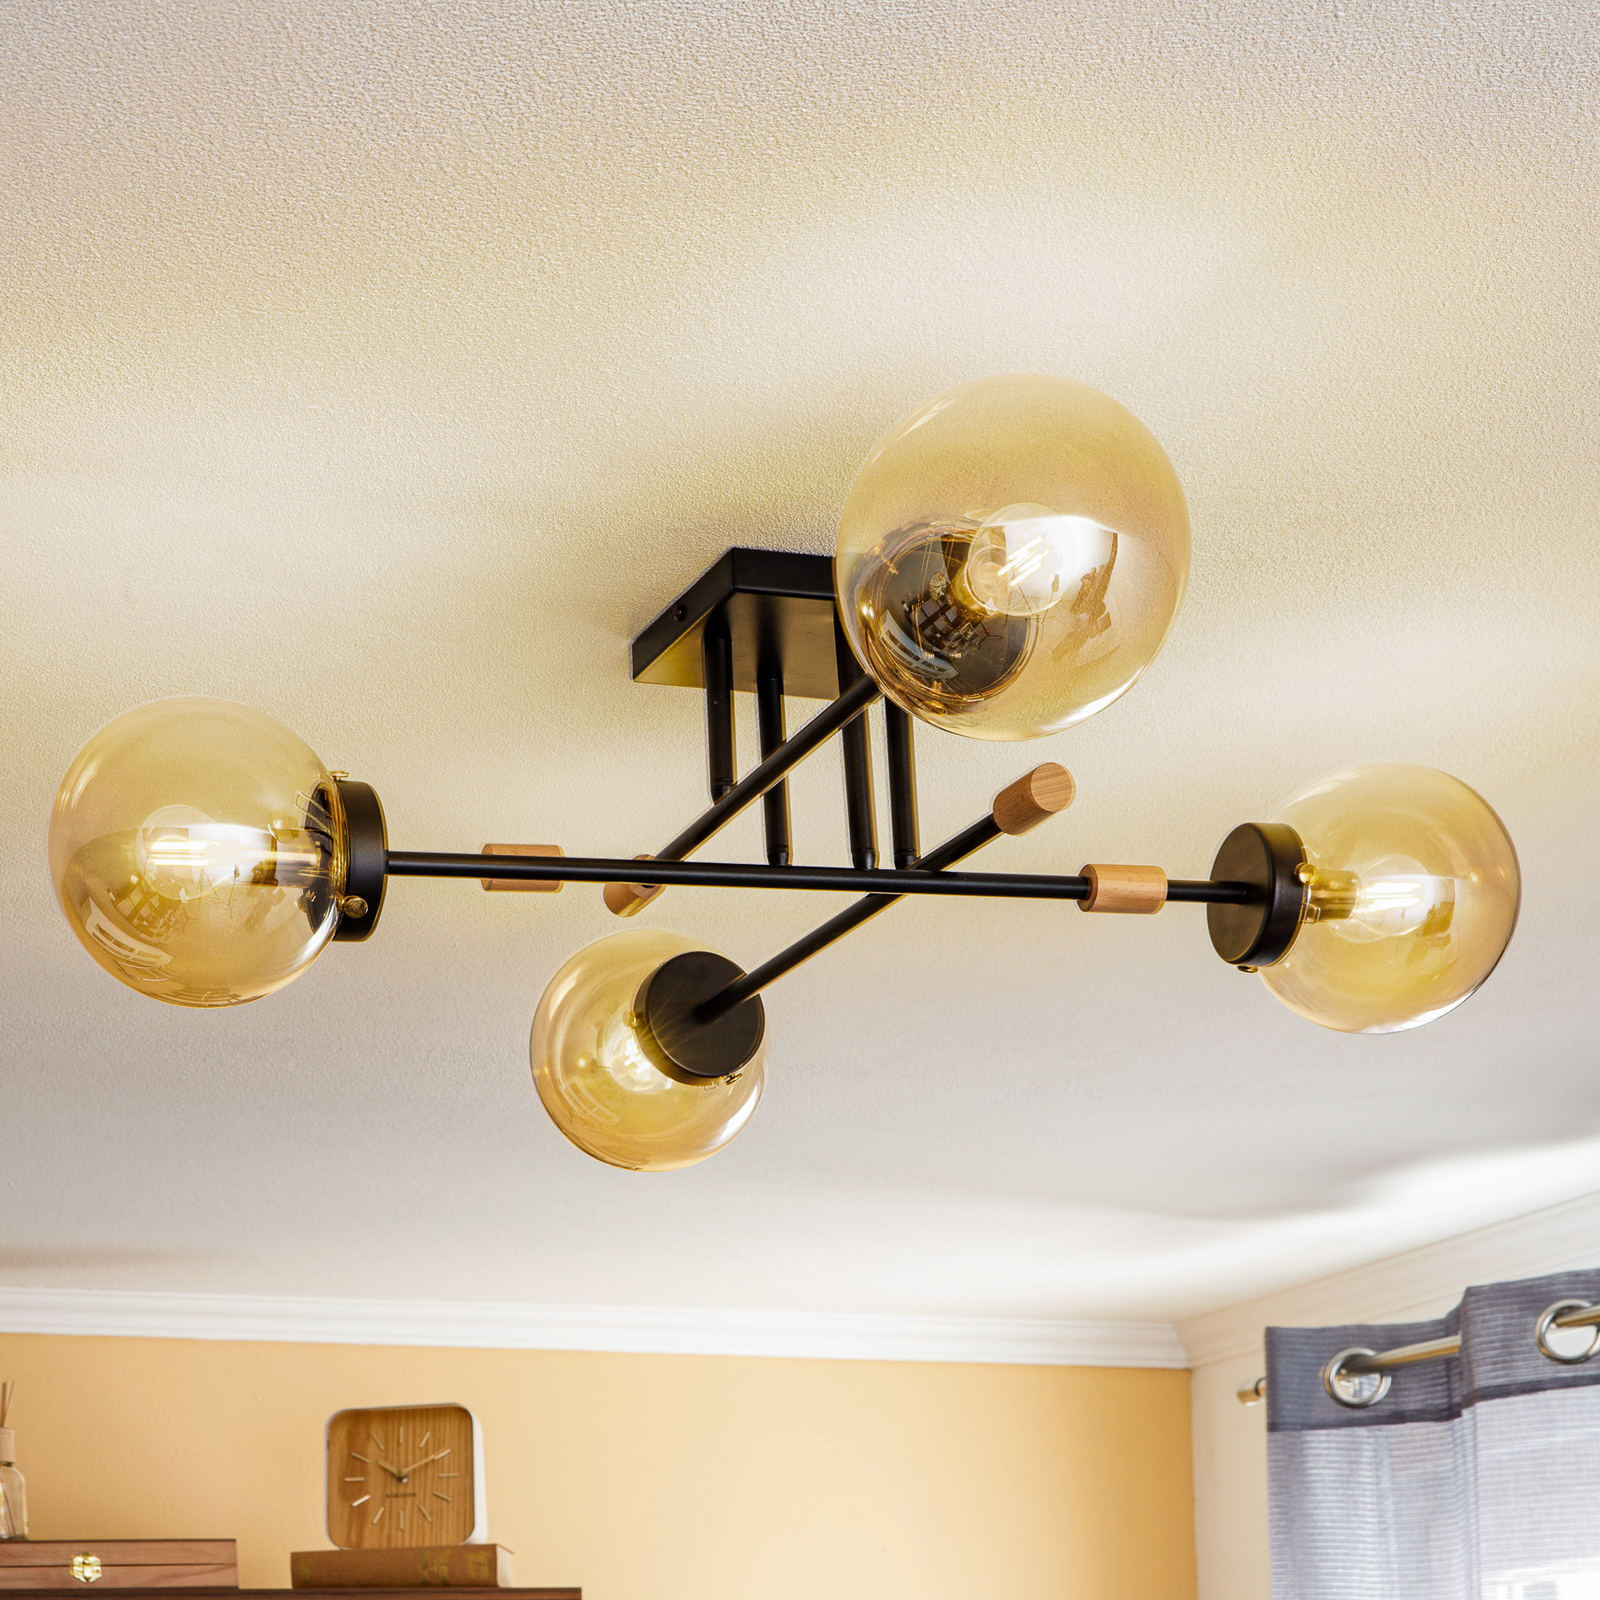 Sinzig ceiling light in black and gold